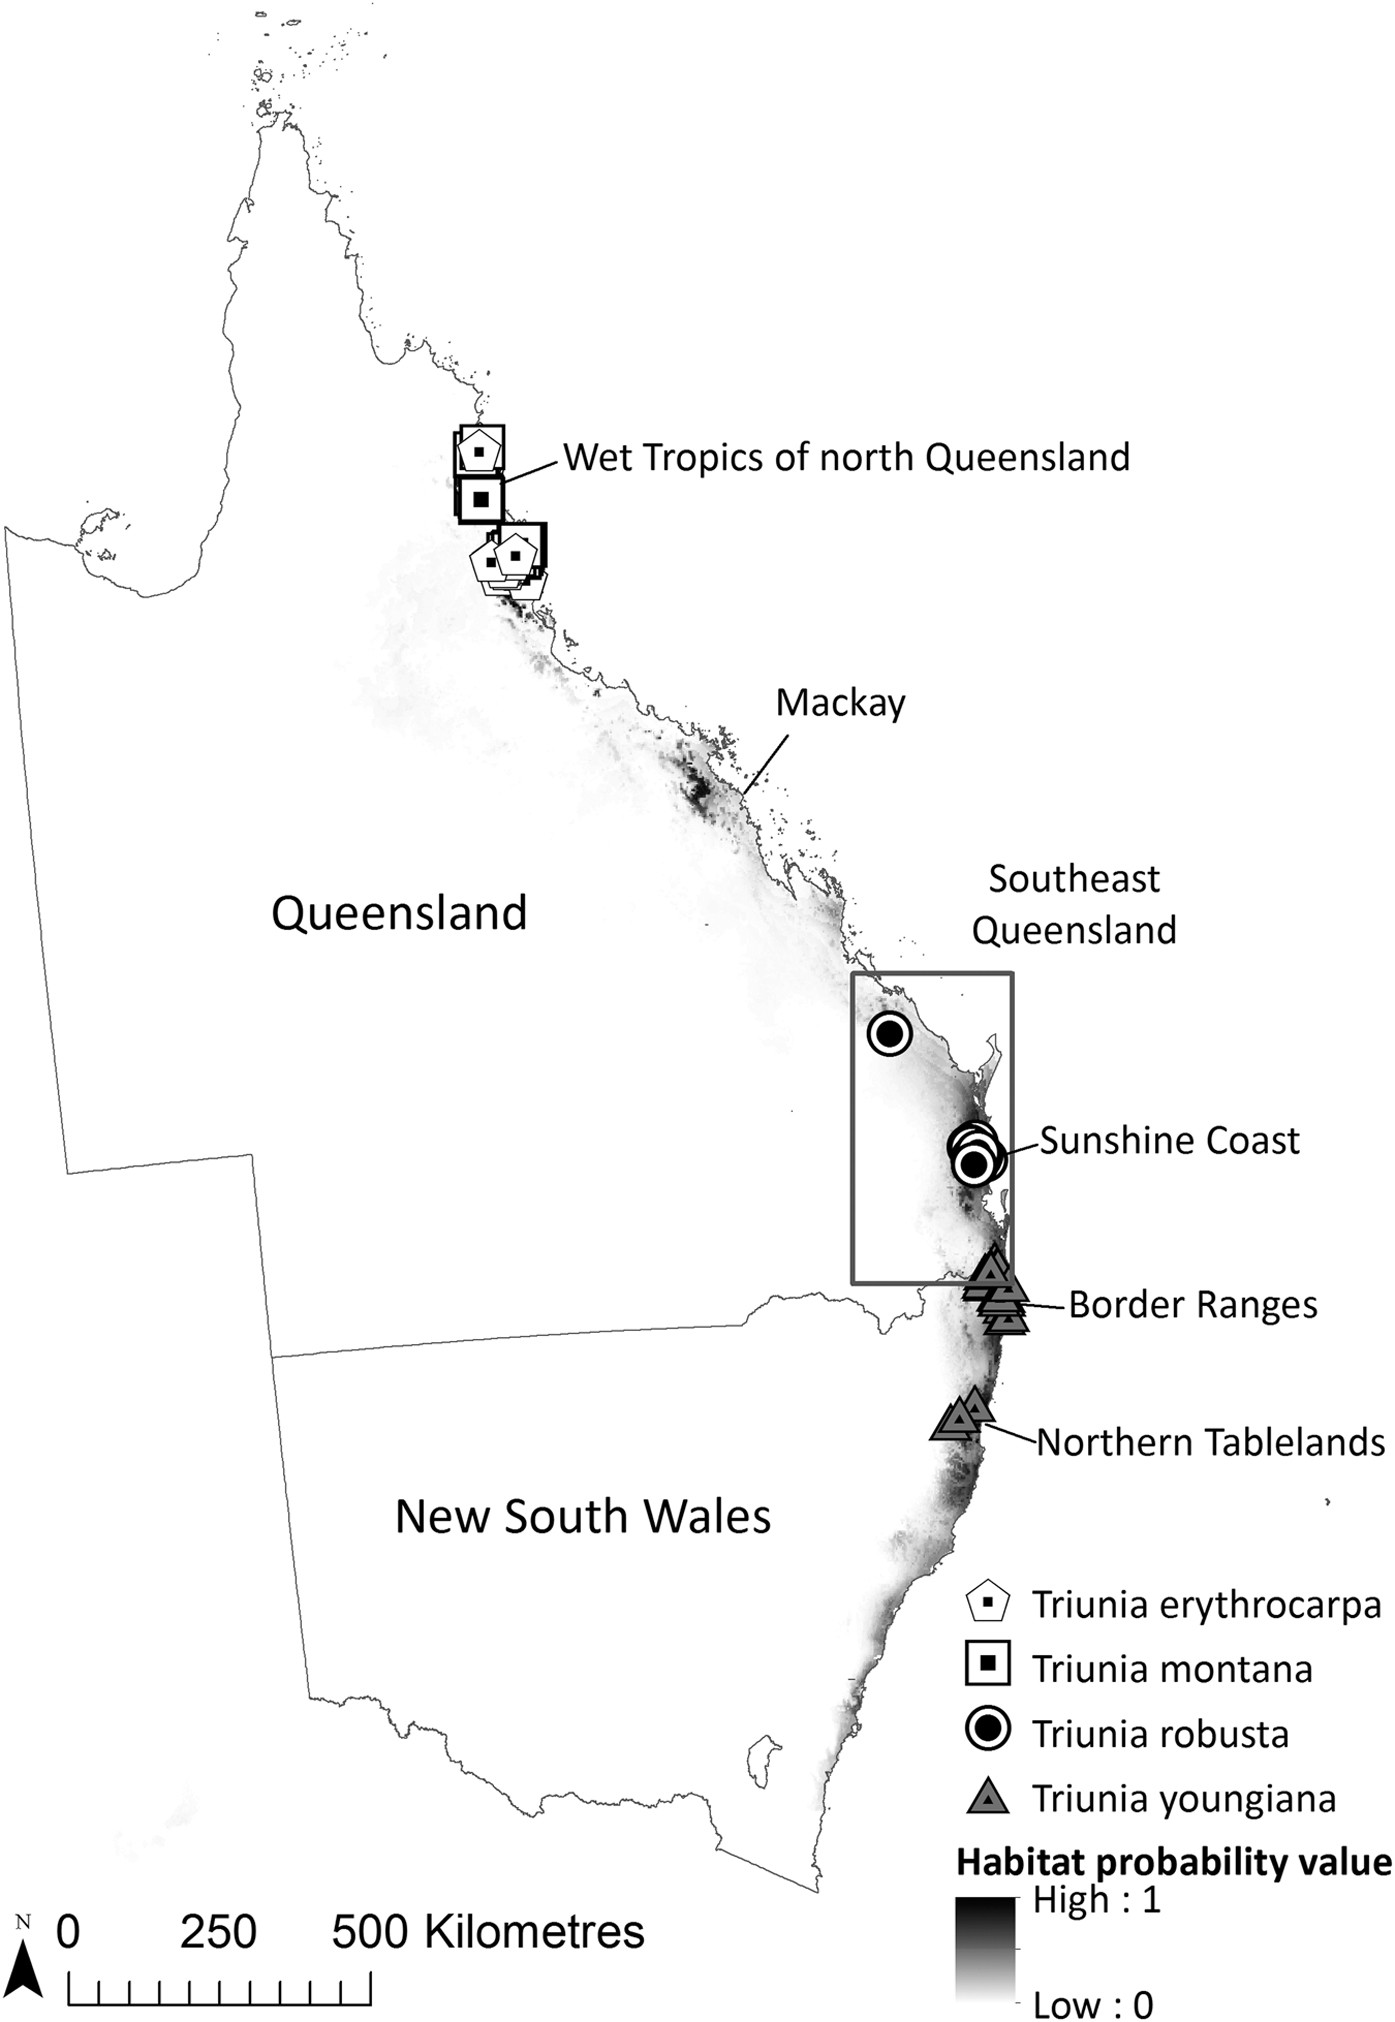 The relationship between climate change and the endangered rainforest shrub  Triunia robusta (Proteaceae) endemic to southeast Queensland, Australia |  Scientific Reports